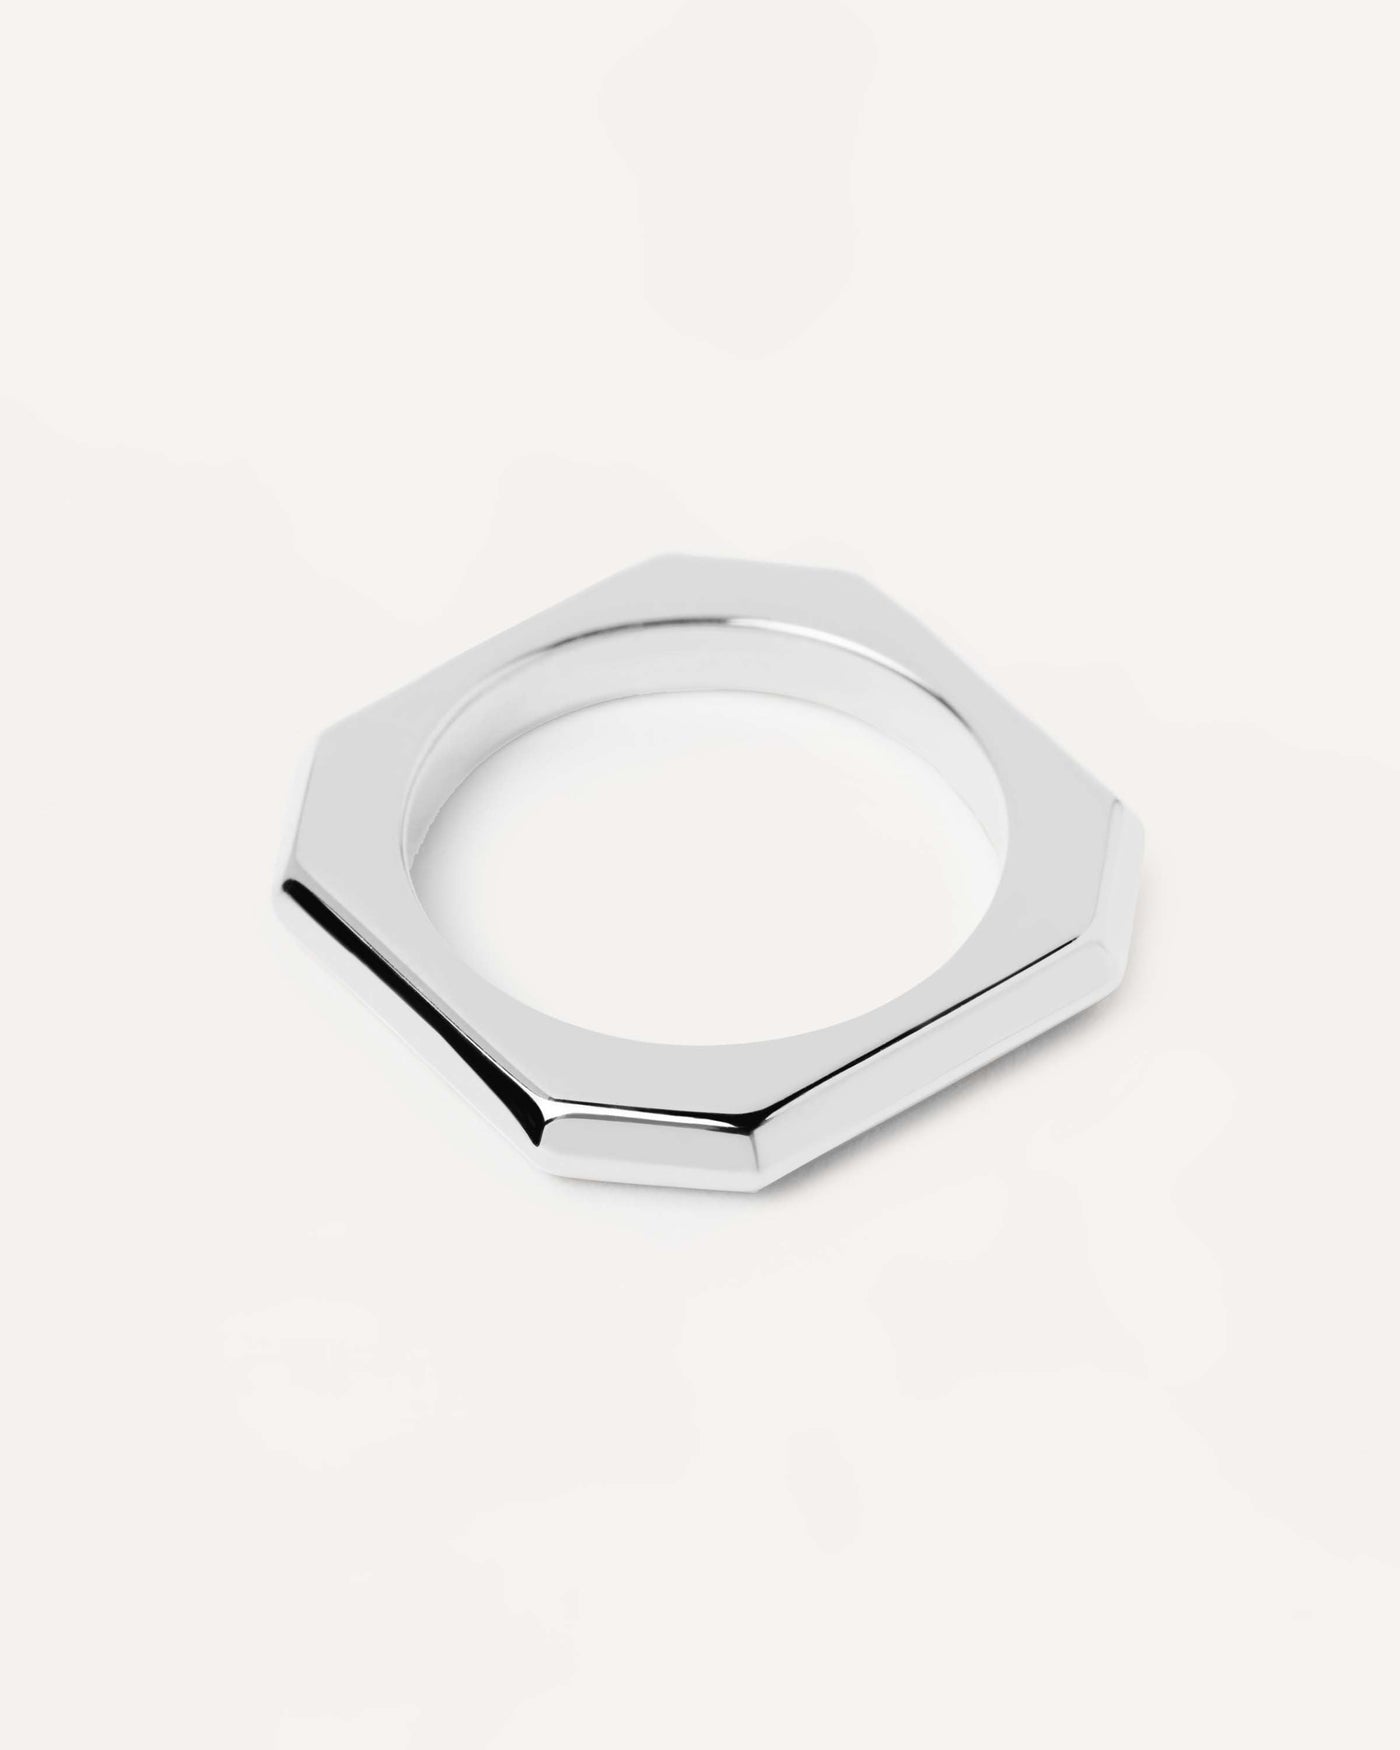 2023 Selection | Signature Link Silver Ring. Octogonal plain ring shaped as a cable link in silver rhodium plating. Get the latest arrival from PDPAOLA. Place your order safely and get this Best Seller. Free Shipping.